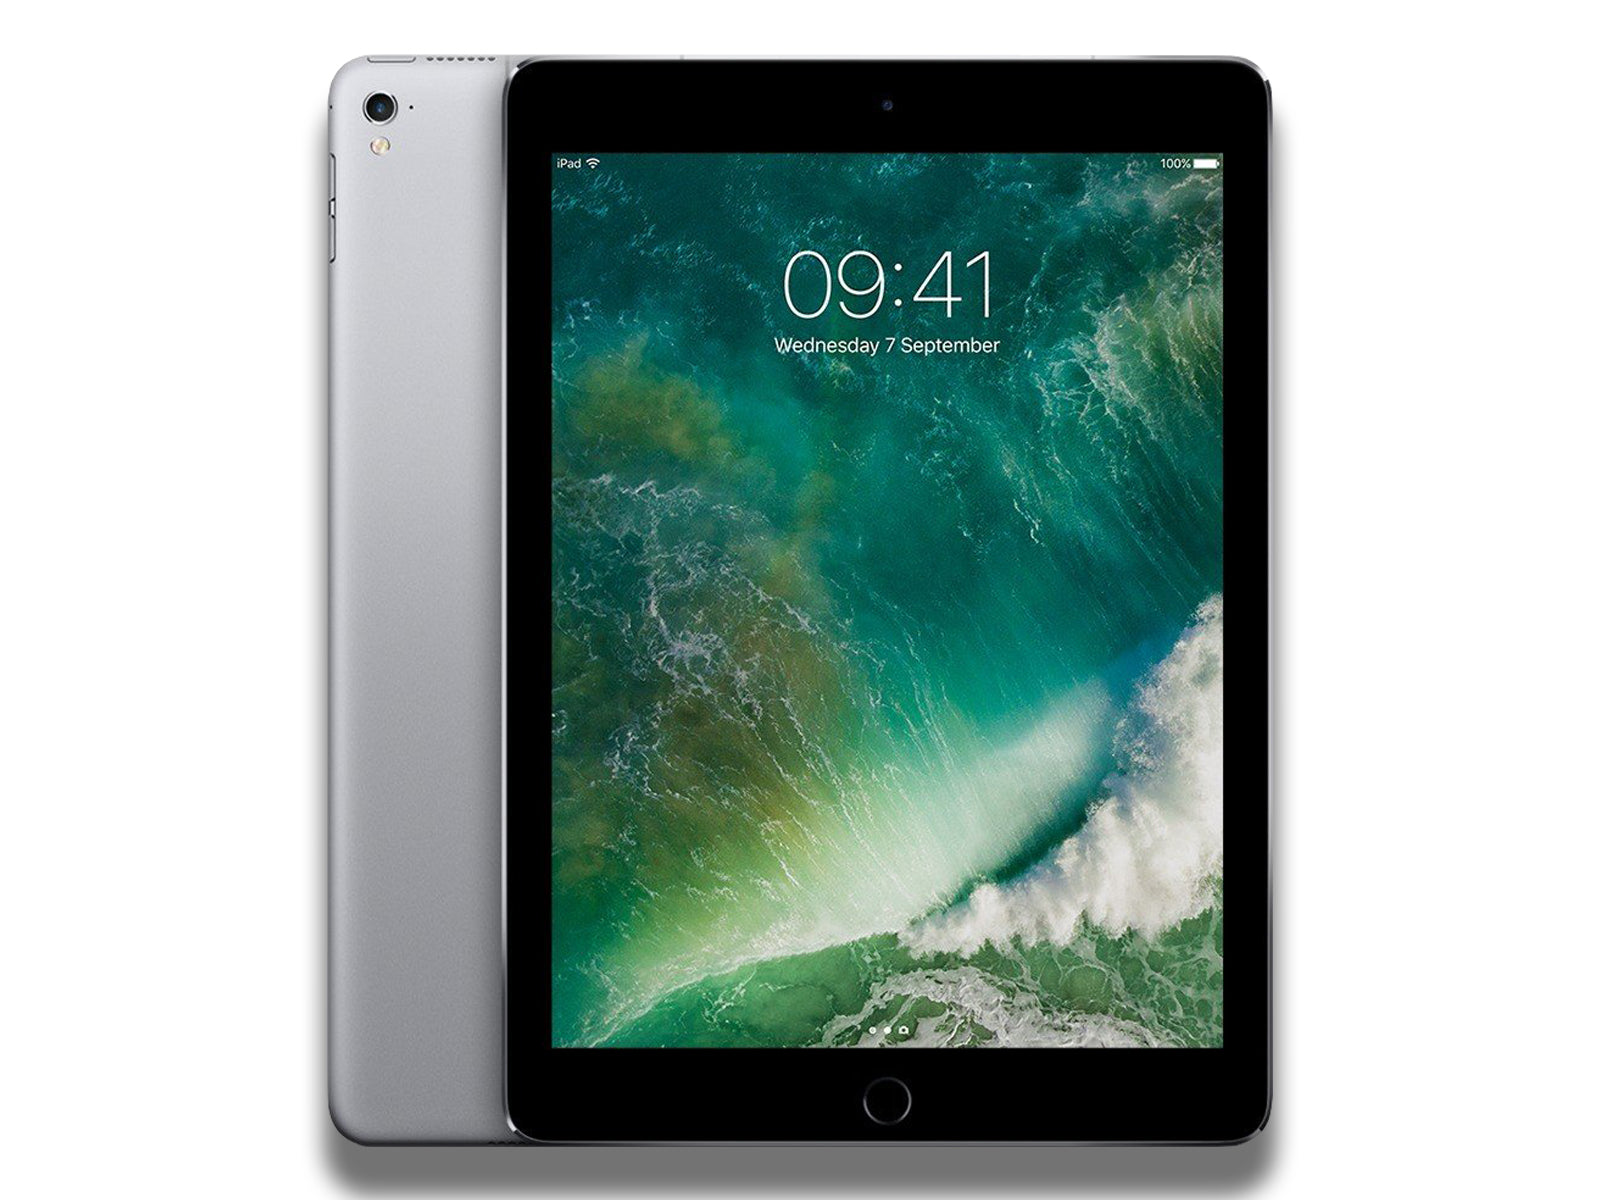 Image shows the space grey Apple iPad Pro 9.7-inch